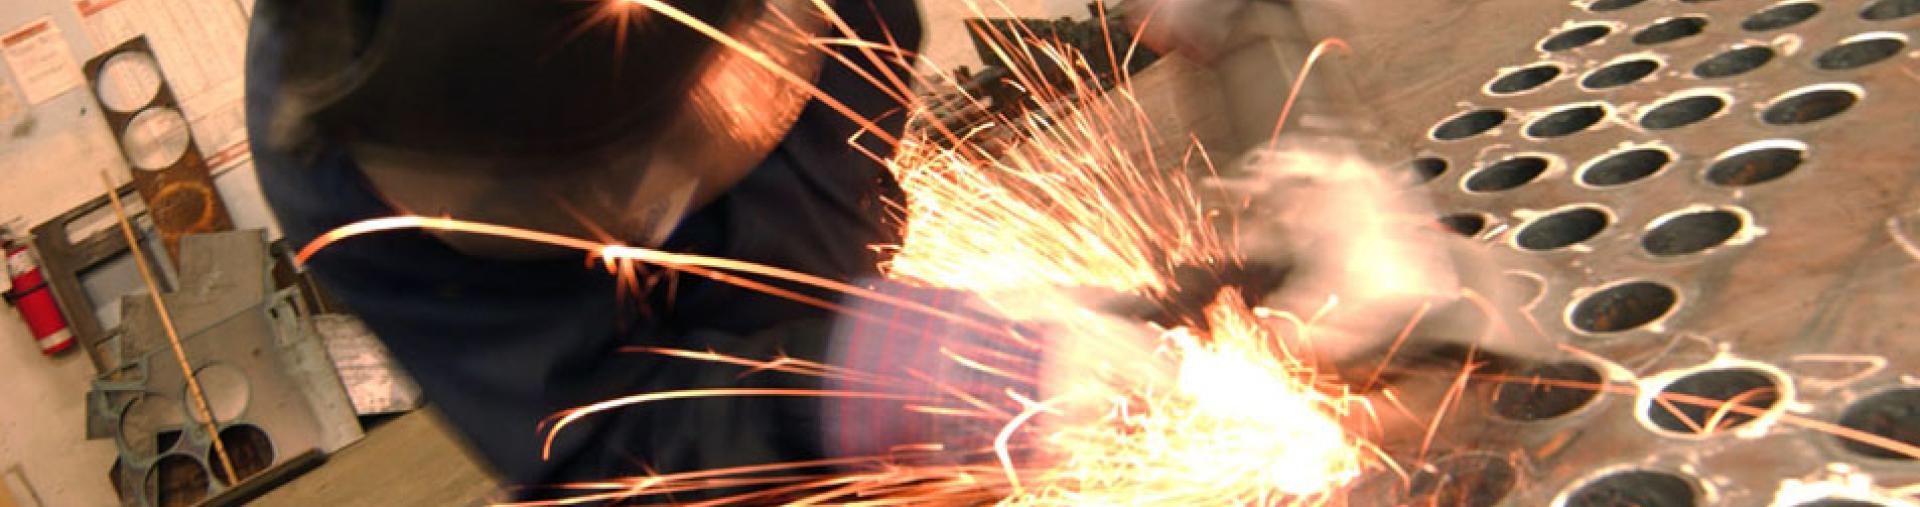 person welding metal with sparks